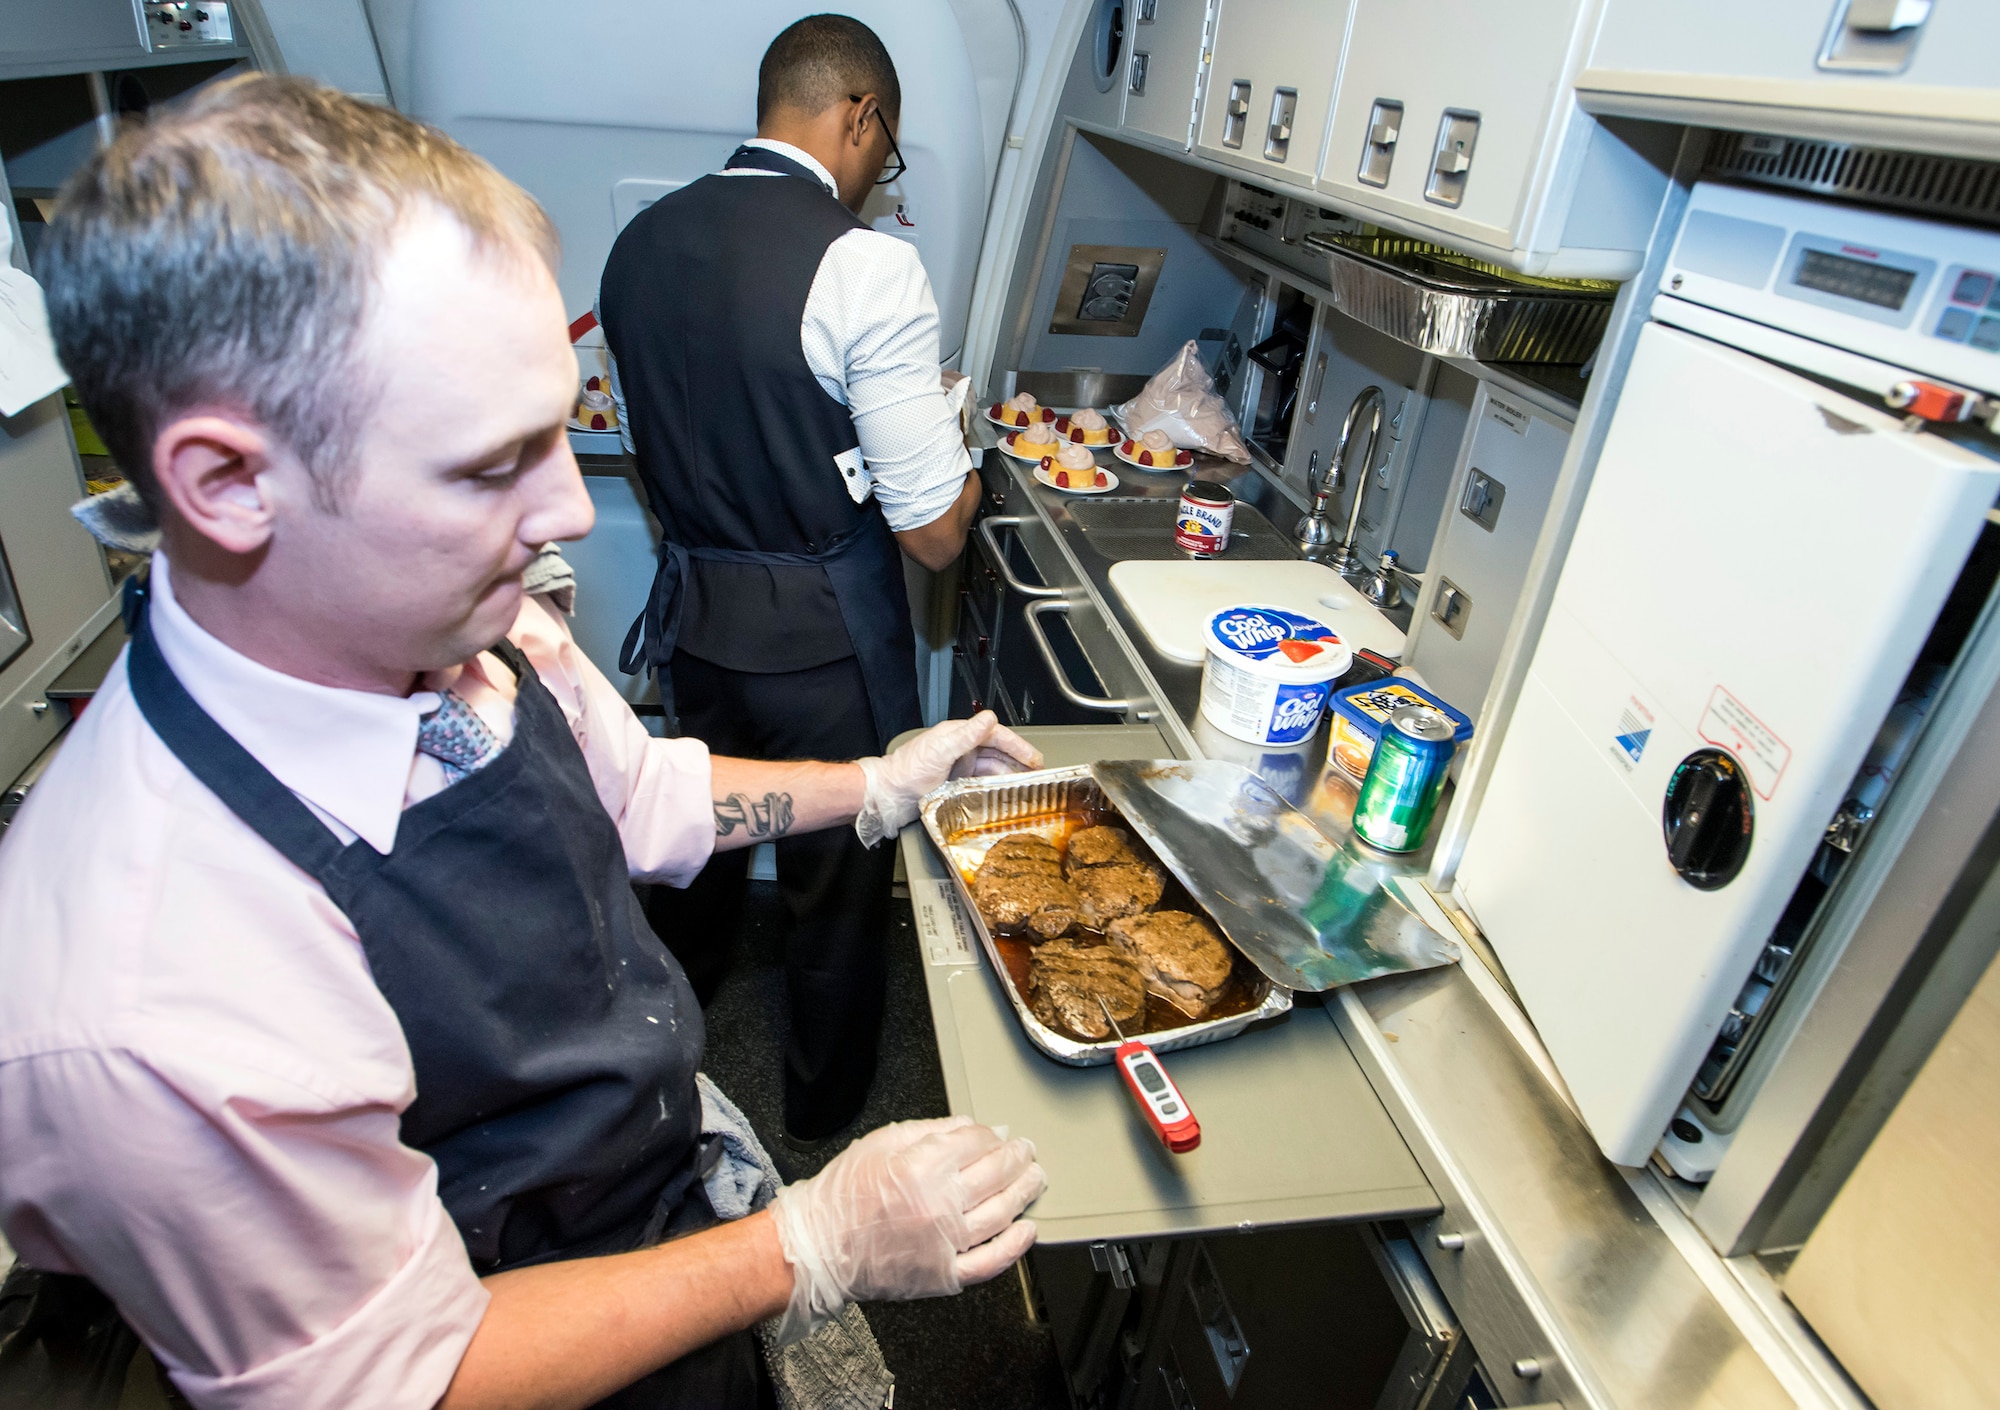 Tech. Sgt. Albert Meriano III and Staff Sgt. Casey Watson, 1st Airlift Squadron flight attendants, prepare lunch at about 50,000 feet while in flight to Royal Air Force Mildenhall, England, Oct. 10, 2015. While a flight attendant’s primary duties is the safety of passengers, they are also culinary artists and experts with customs regulations. (U.S. Air Force photo/Senior Master Sgt. Kevin Wallace)